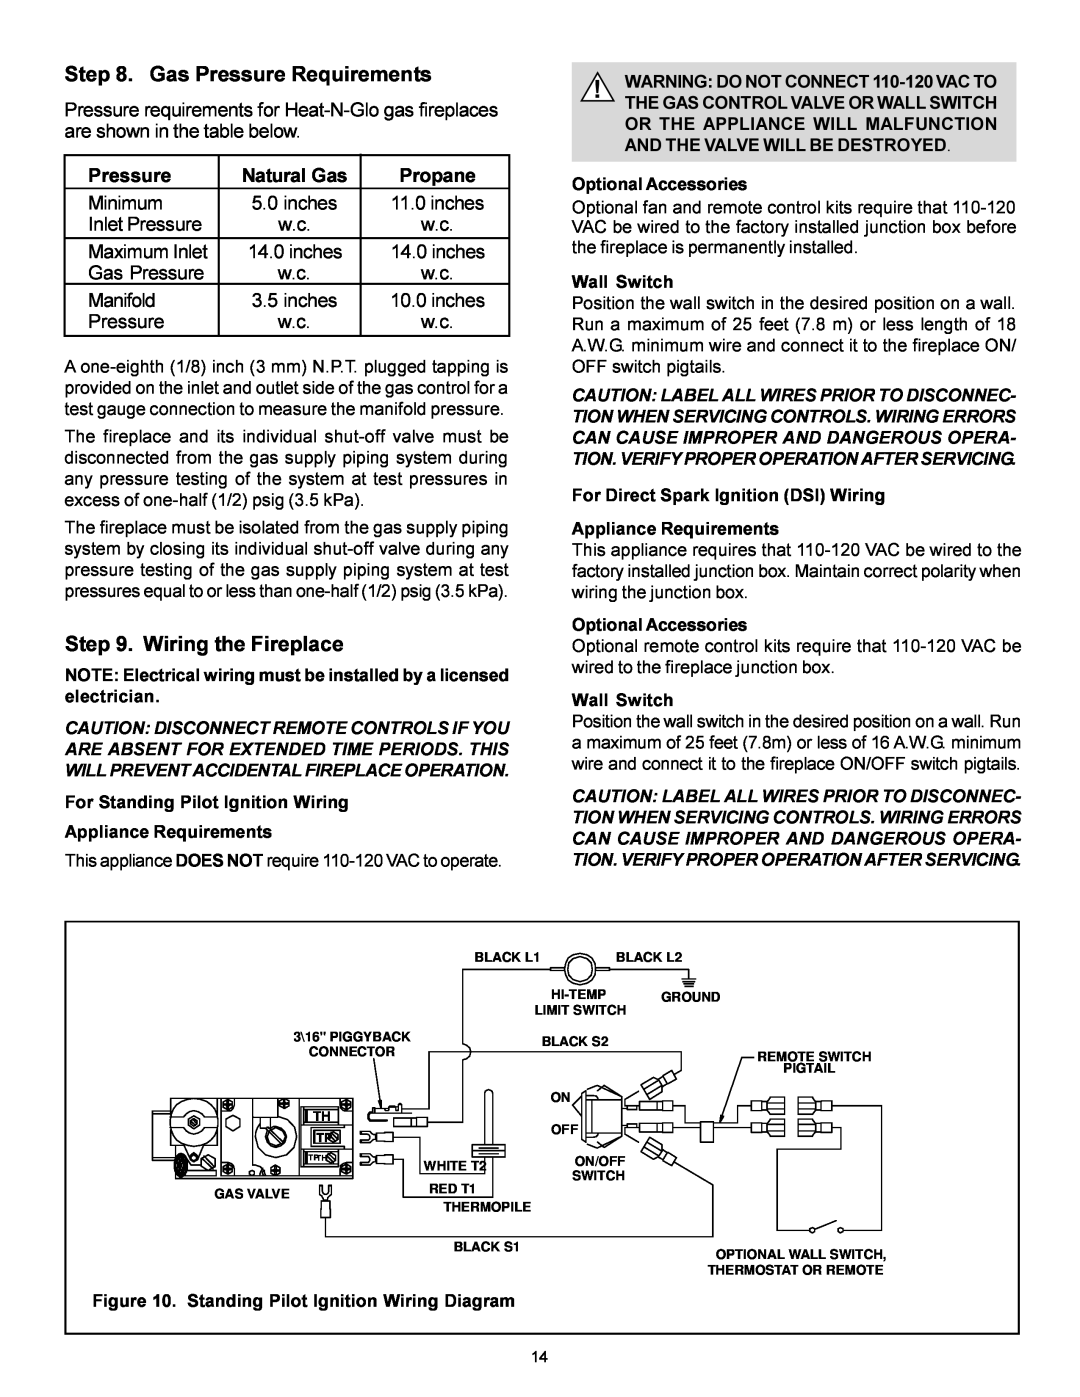 Heat & Glo LifeStyle ST-38GTV Gas Pressure Requirements, Wiring the Fireplace, inches, For Standing Pilot Ignition Wiring 